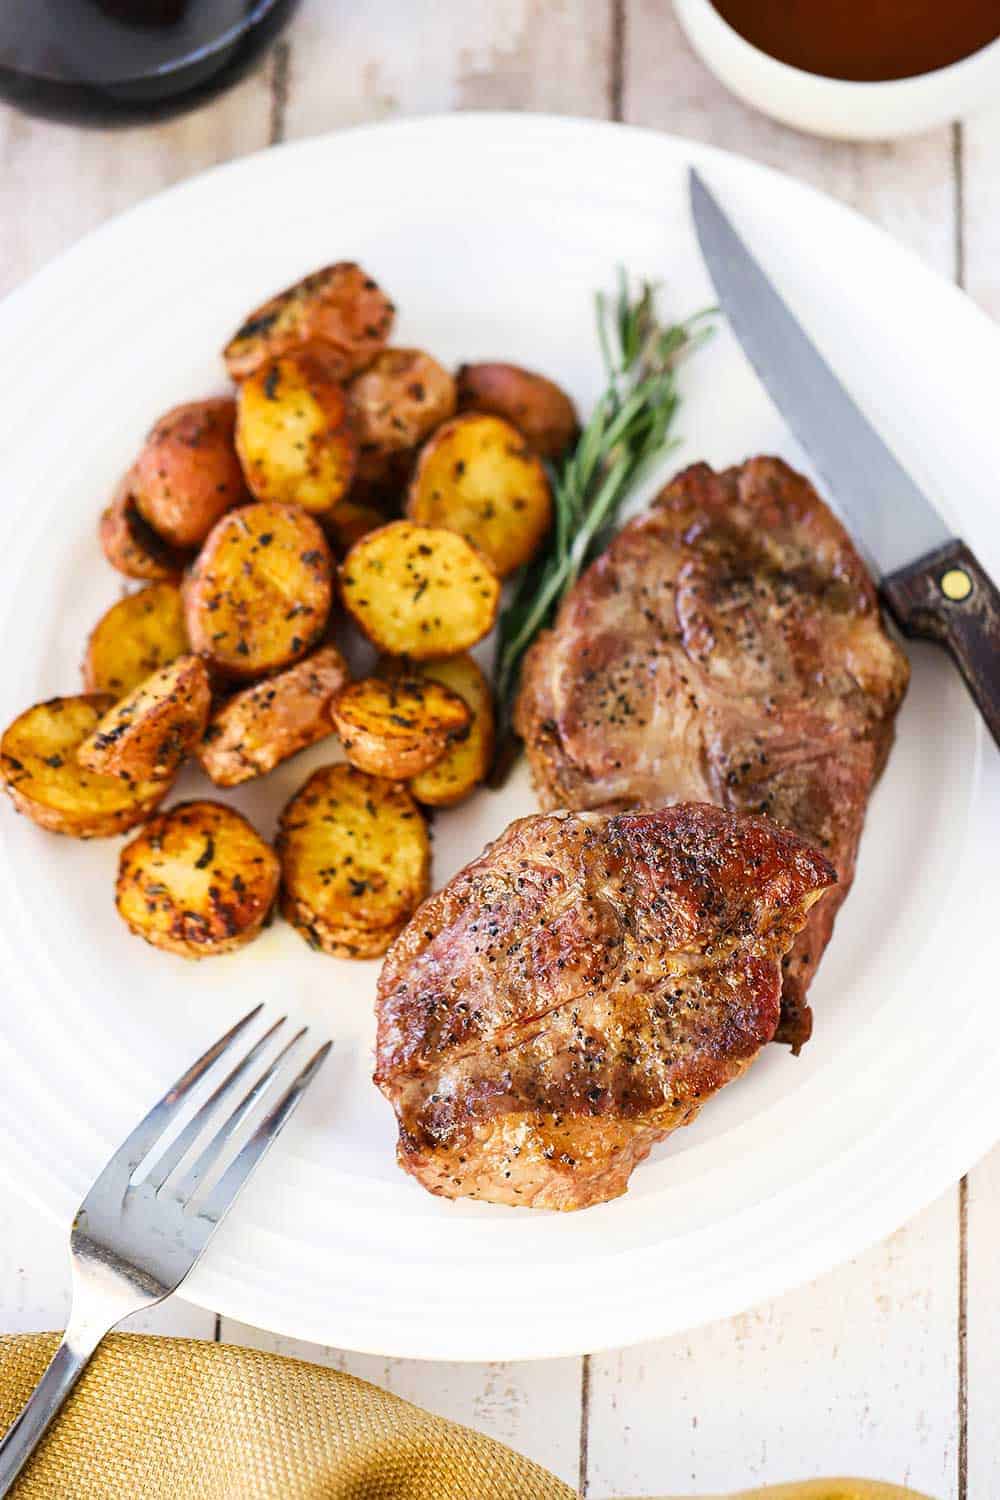 An overhead view of a white dinner plate with a grilled Delmonico pork steak on it next to a sprig of rosemary and roasted new potatoes.